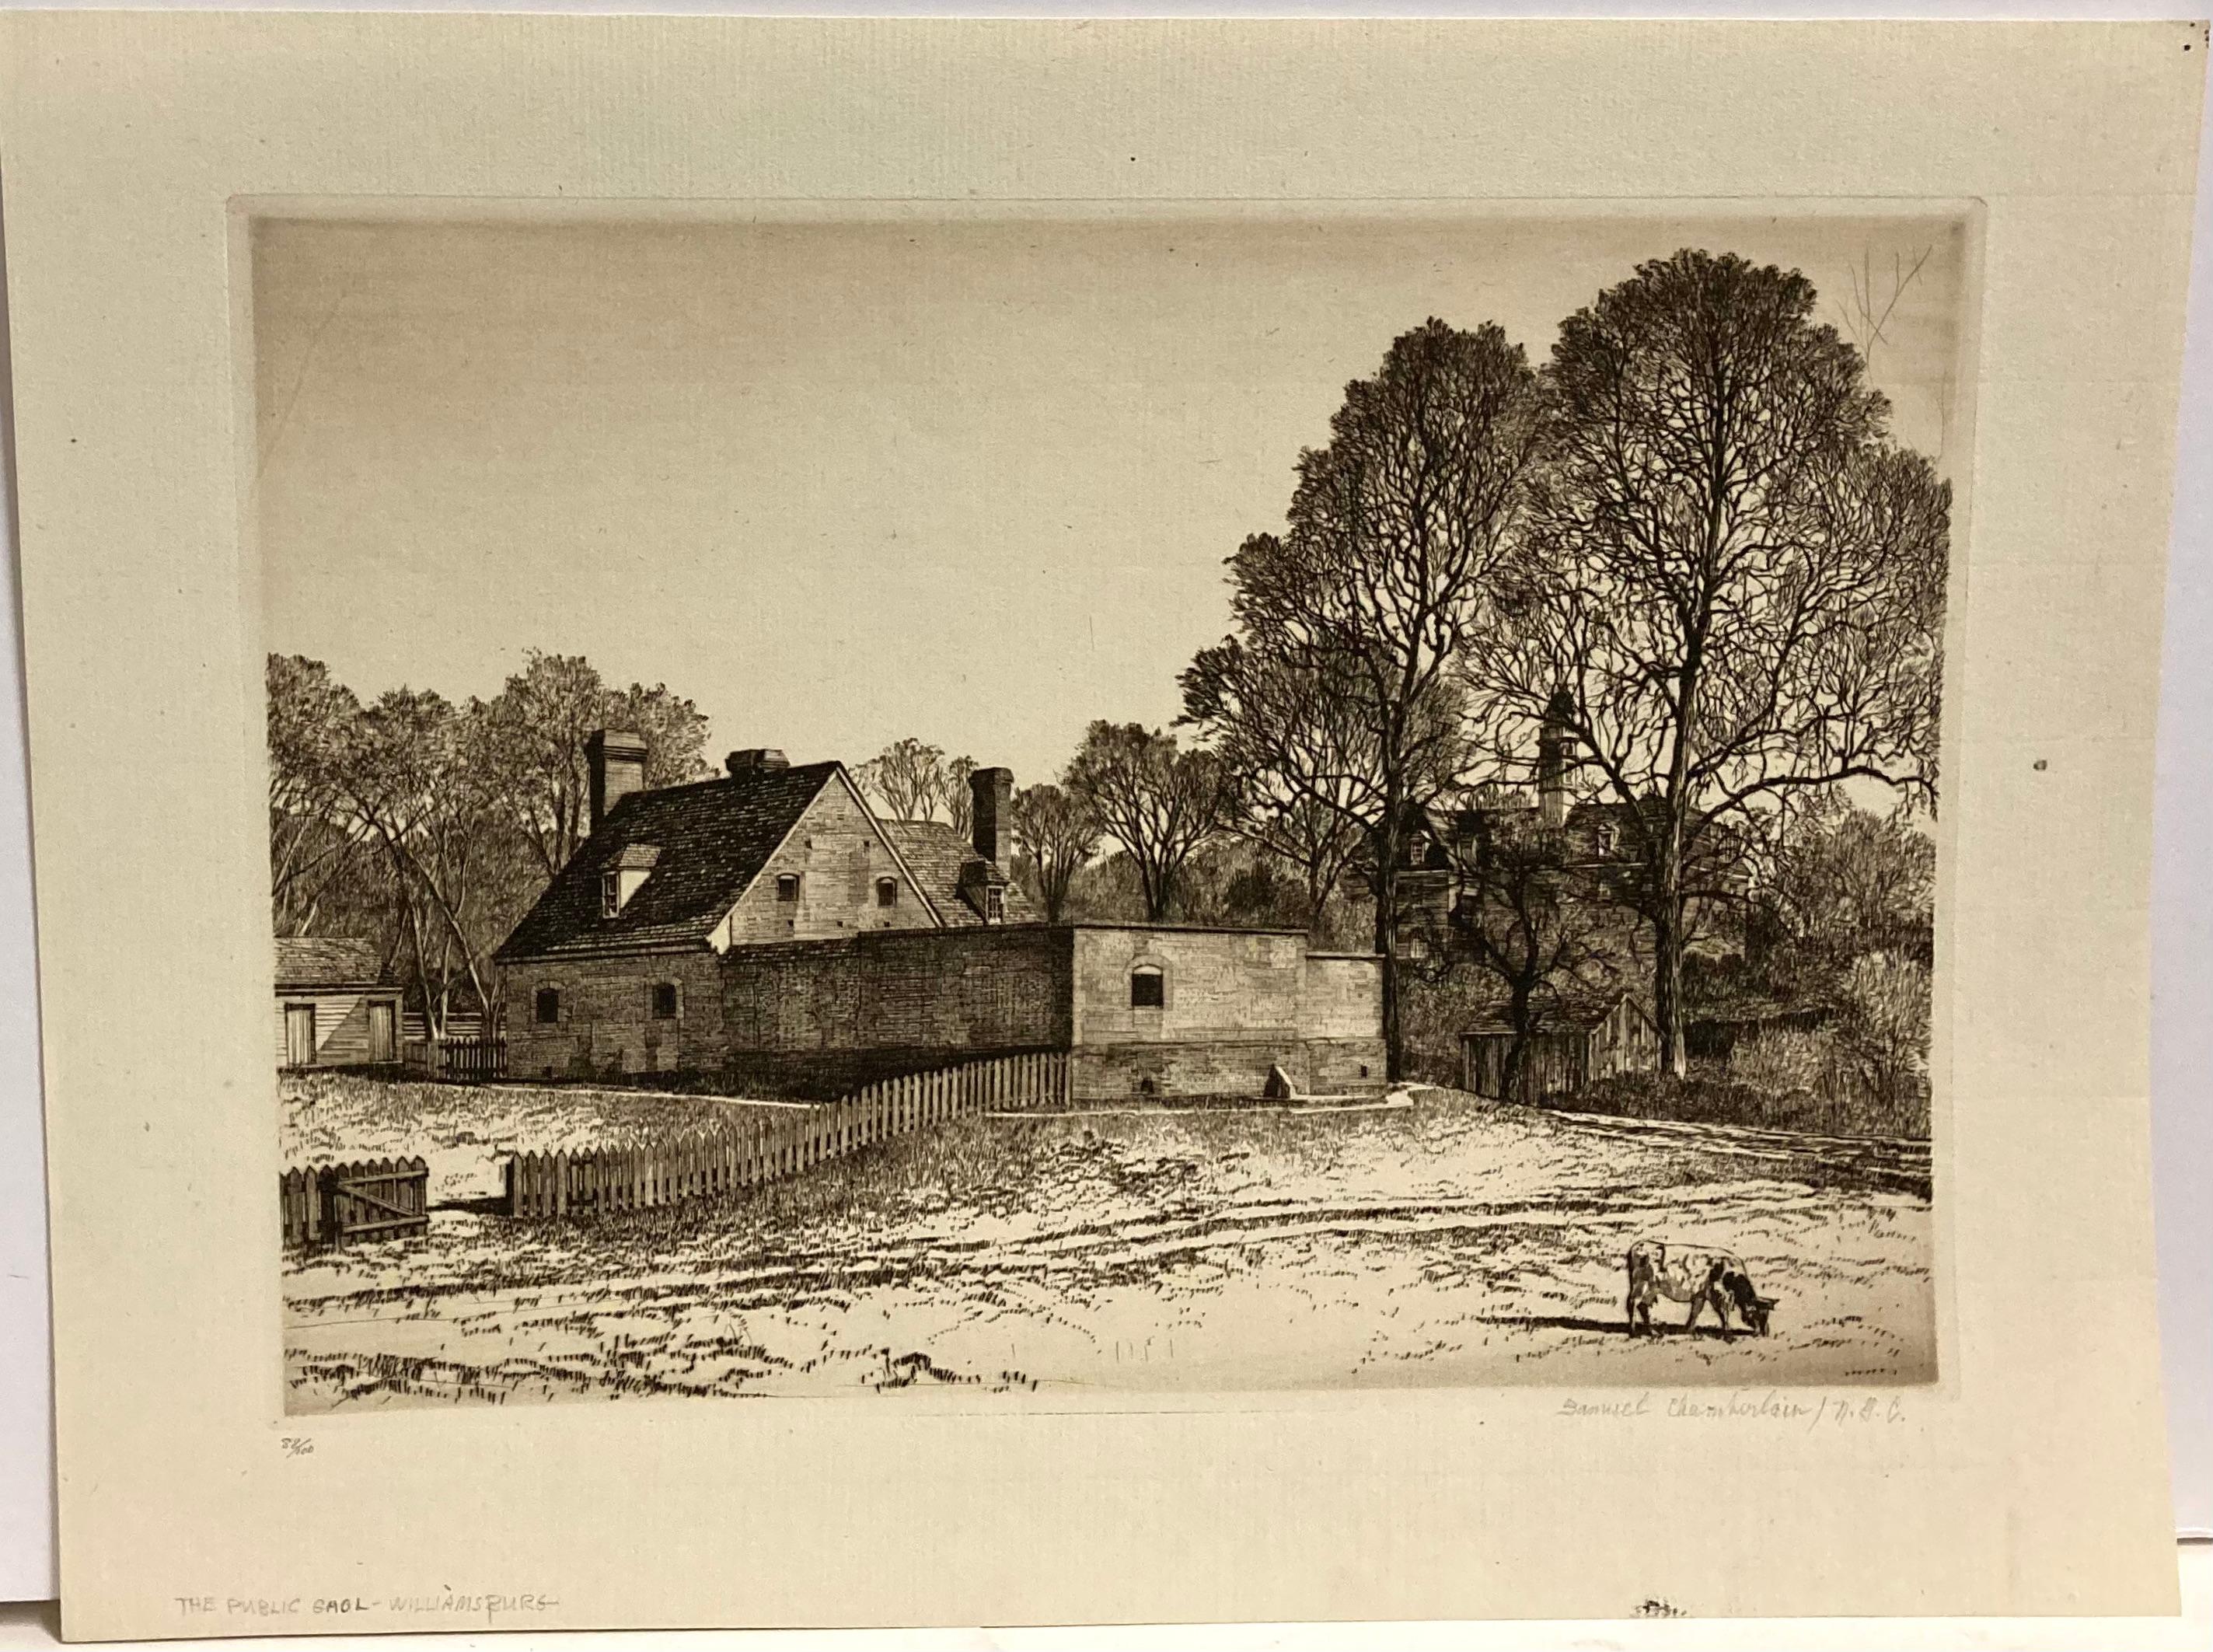 Samuel Chamberlain was a superb draftsman and his architectural images are often very complex. This image is, by contrast, quiet and understated: serene to the point of lonely. It's a view of the 'Gaol' in Virginia's Colonial Williamsburg. More than